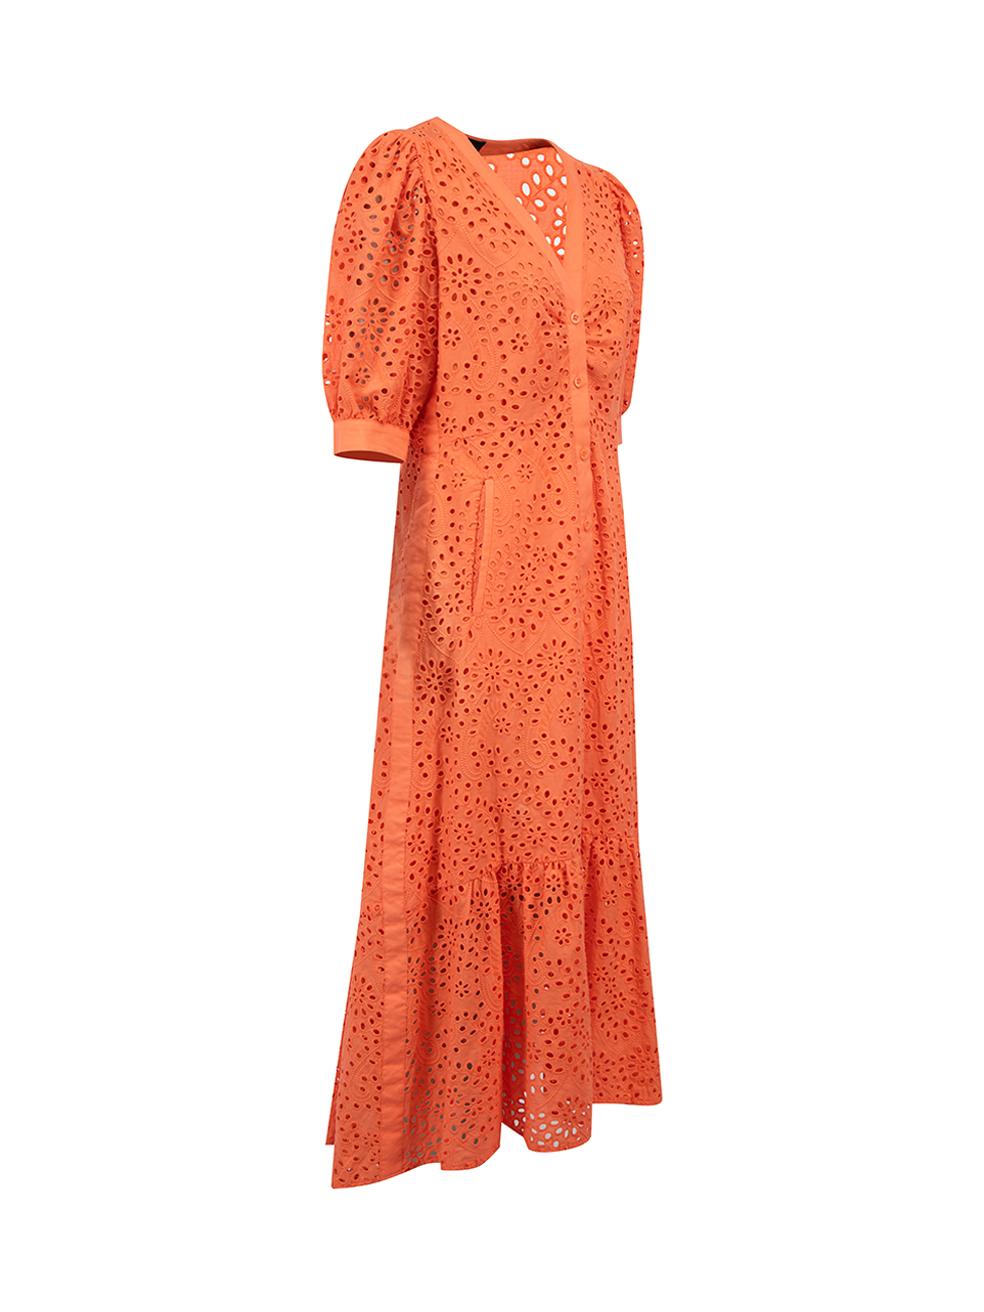 CONDITION is Very good. Hardly any visible wear to dress is evident on this used ME+EM designer resale item.



Details


Orange

Cotton

Midi dress

Floral broderie pattern

Short sleeved

V-neckline

Button up fastening

2x Side pockets 





Made